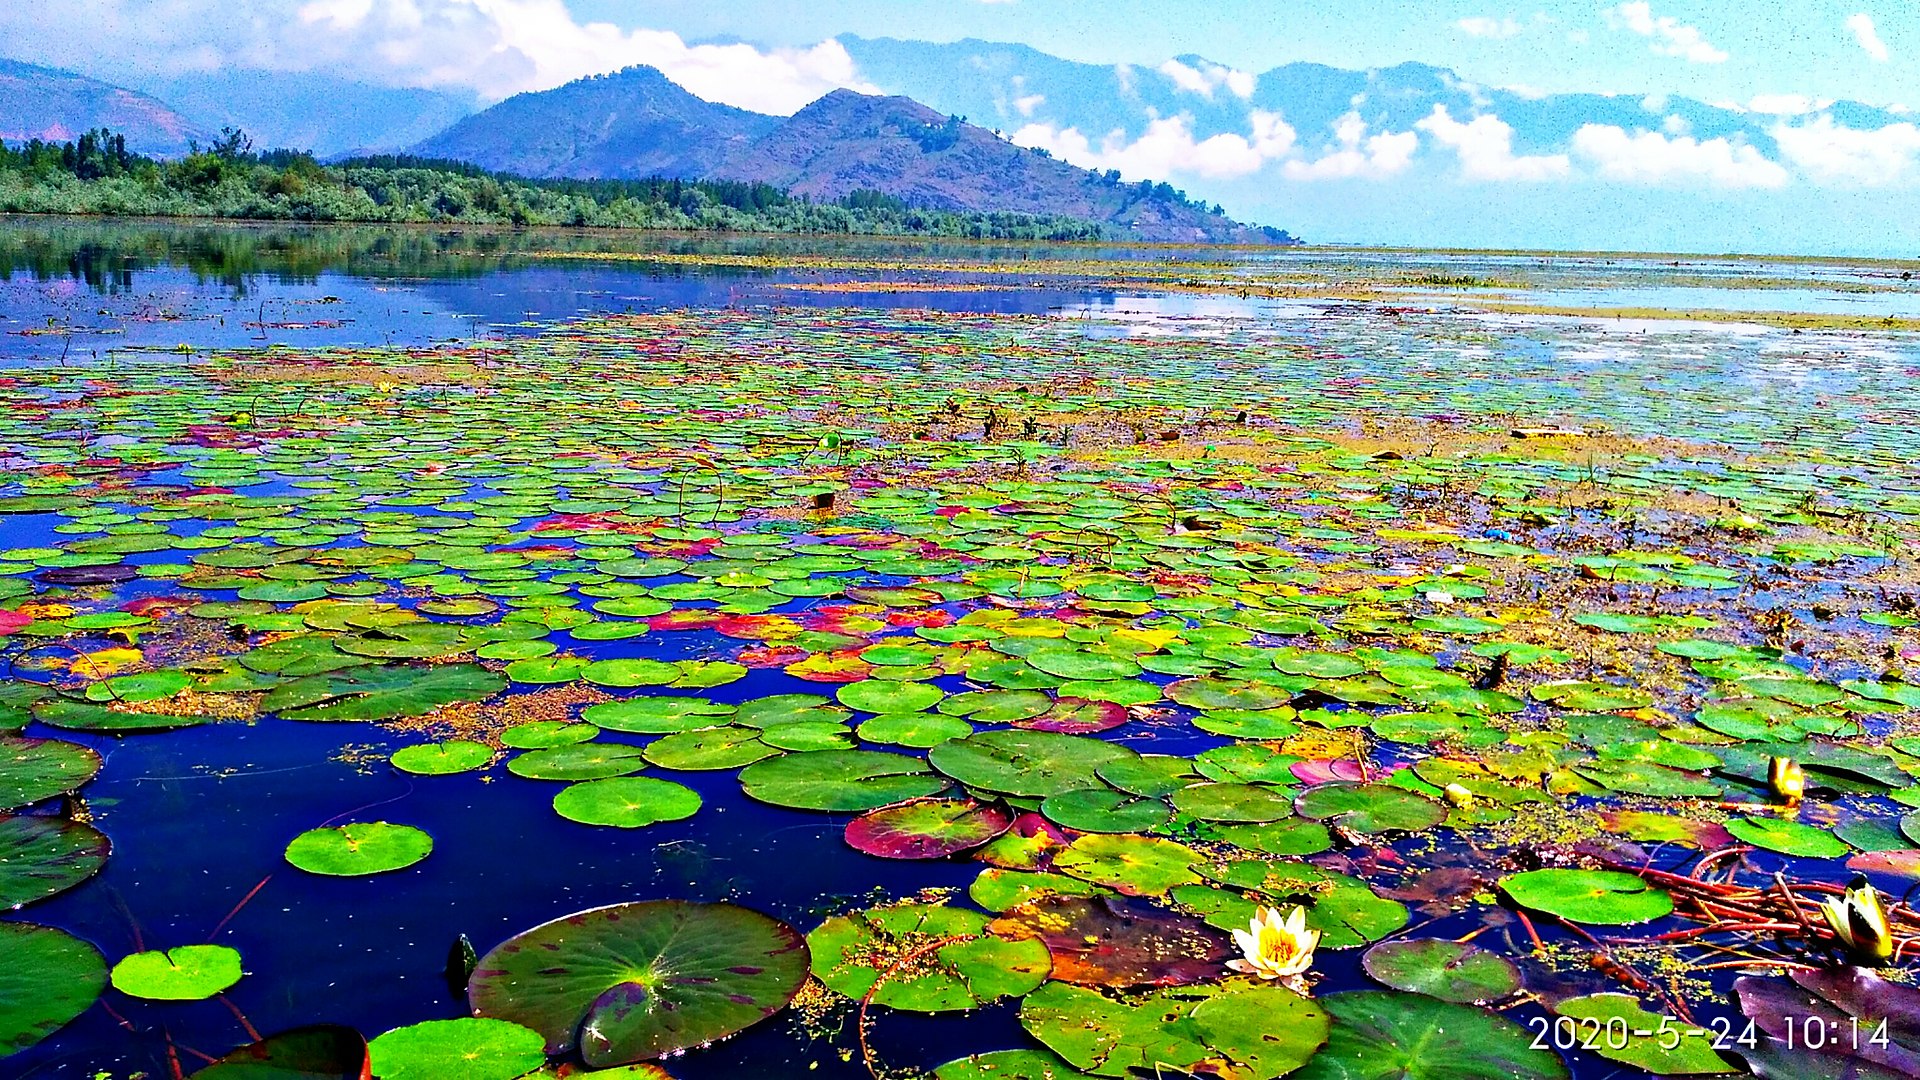 Wular_Lake_places-to-visit-in-kashmir - Pop Culture, Entertainment, Humor,  Travel & More